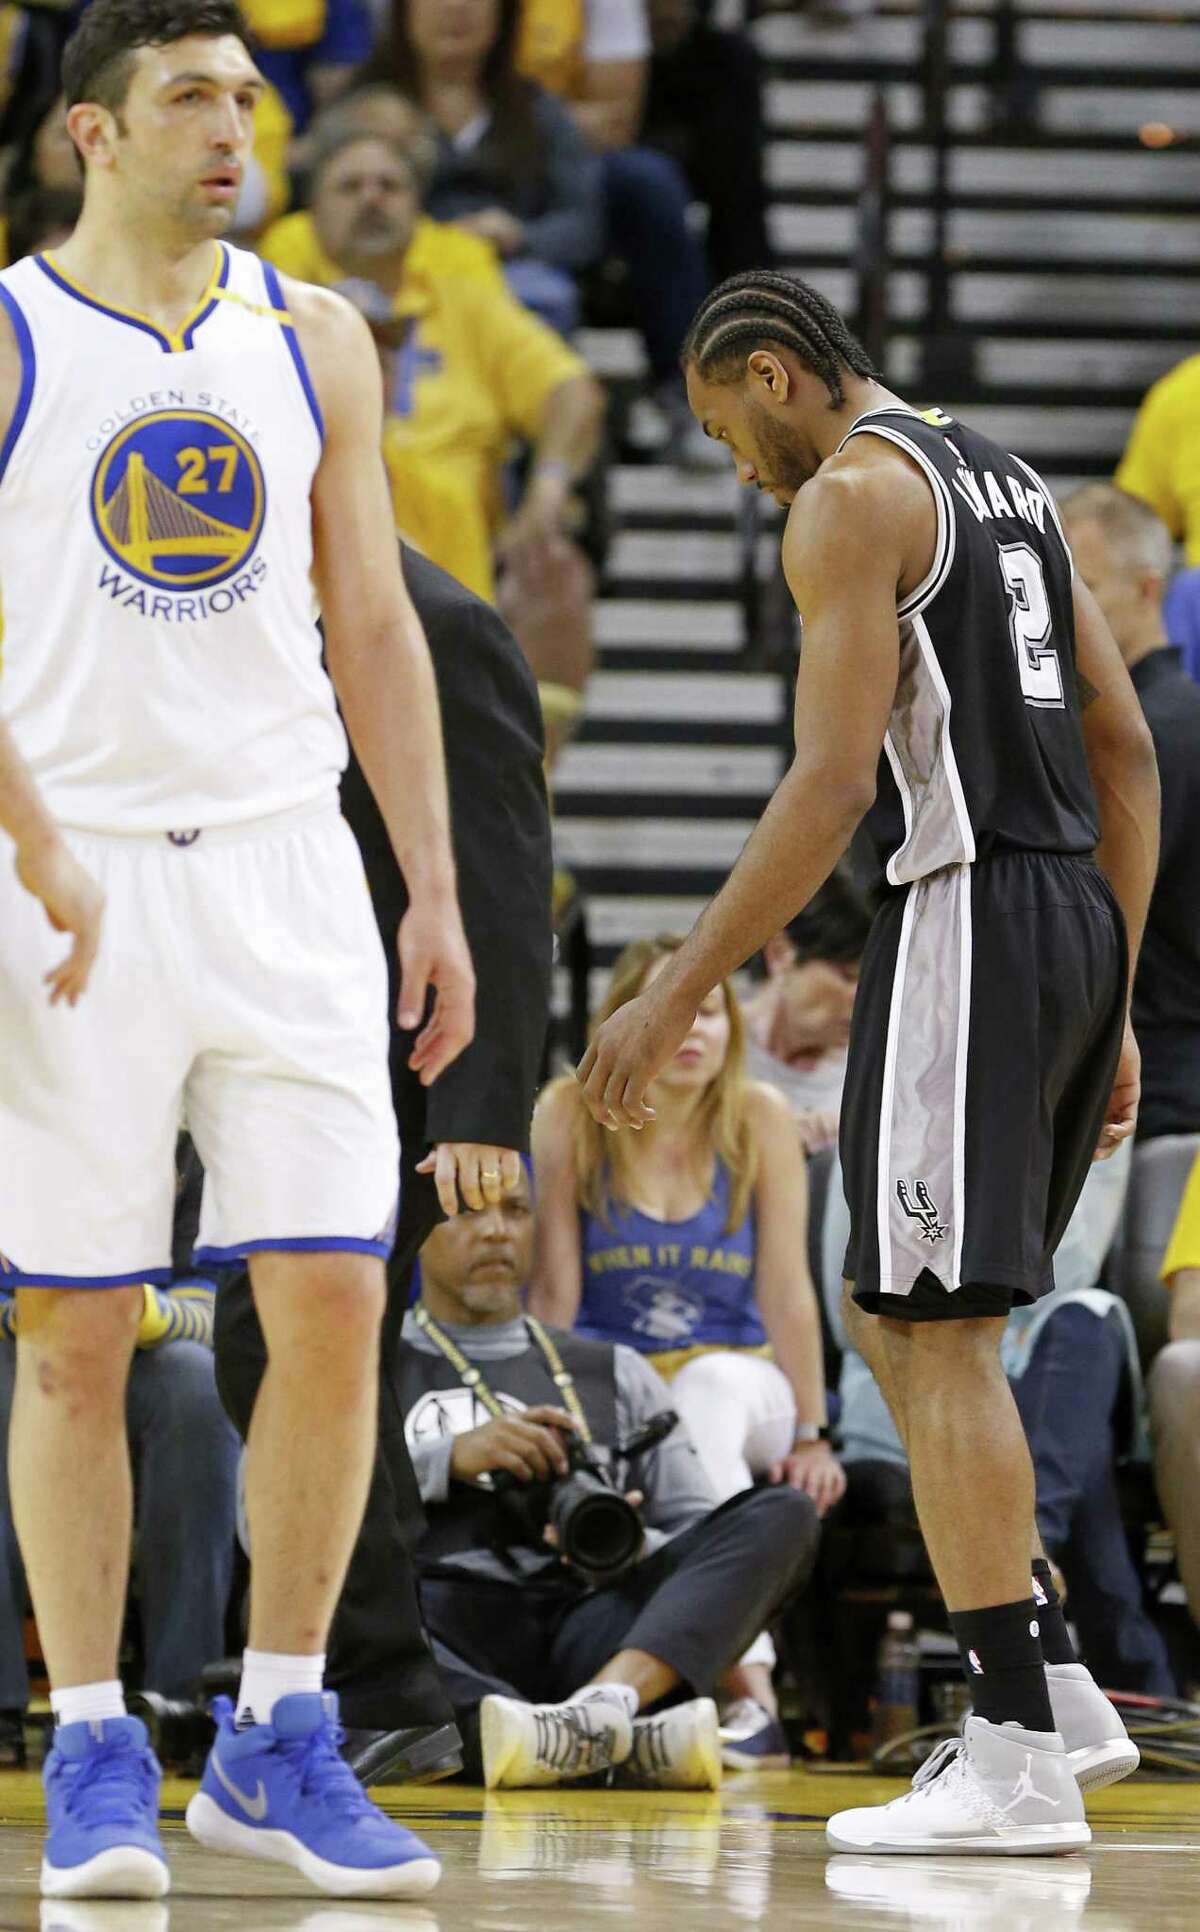 Spurs’ Kawhi Leonard walks off the court after being injured on a play involving the Warriors’ Zaza Pachulia(left) during second half action of Game 1 in the Western Conference finals on May 14, 2017 at Oracle Arena in Oakland, Calif.